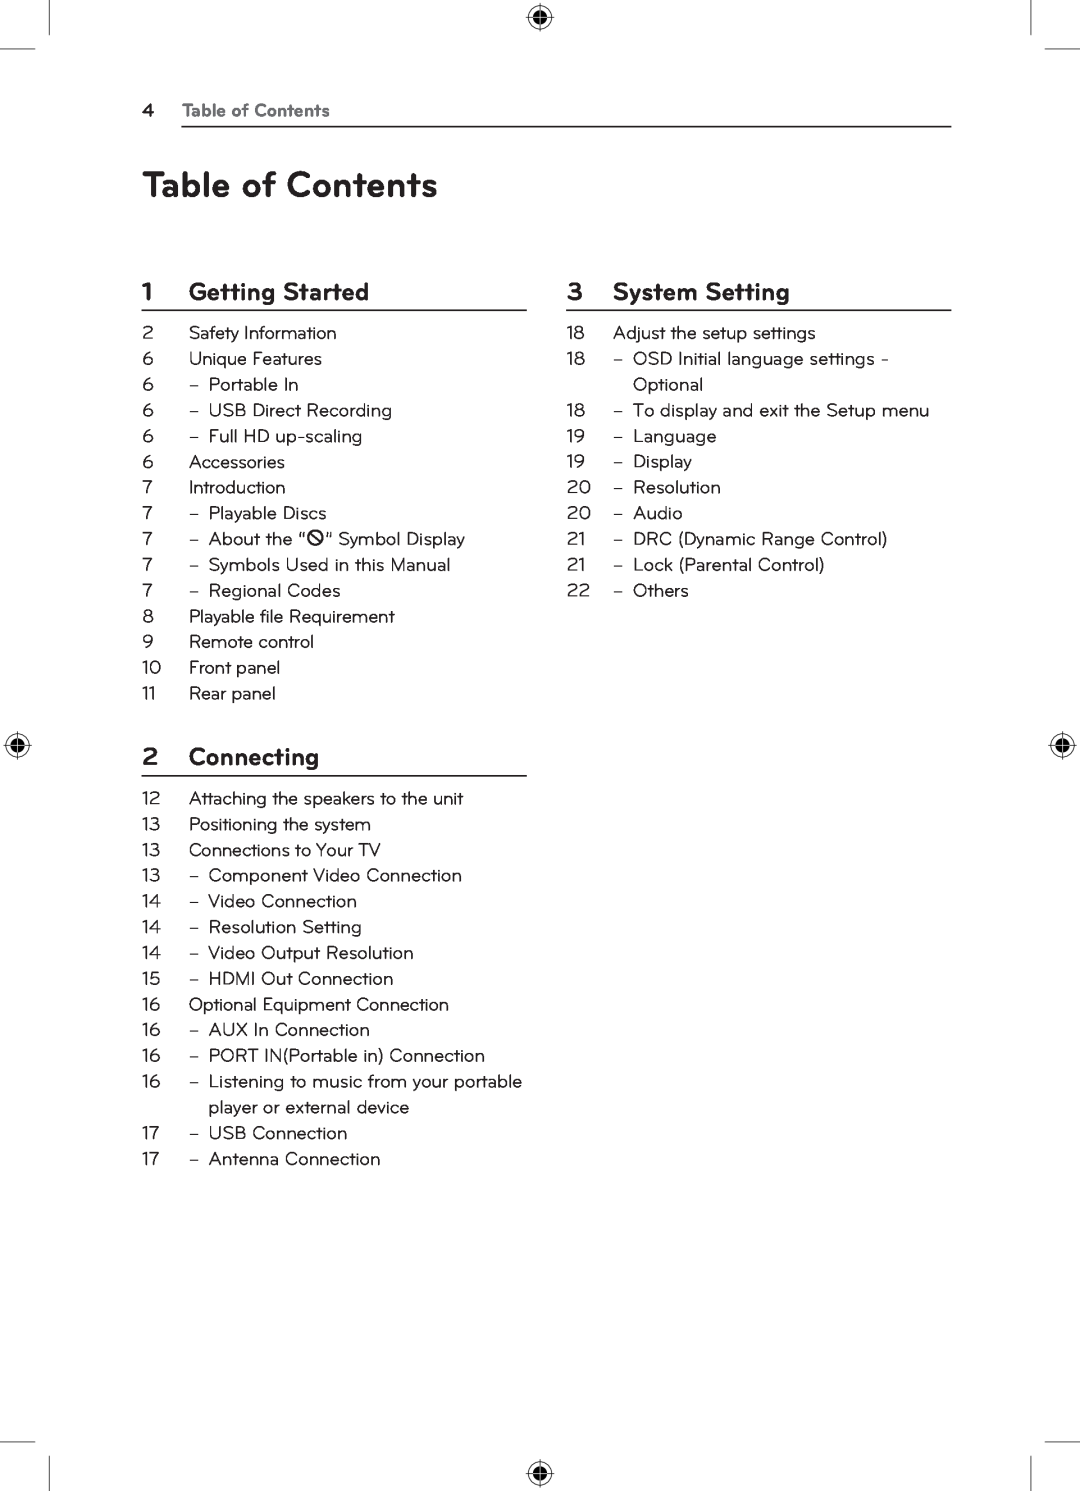 LG Electronics DH4220S owner manual Table of Contents, Getting Started, System Setting, Connecting 